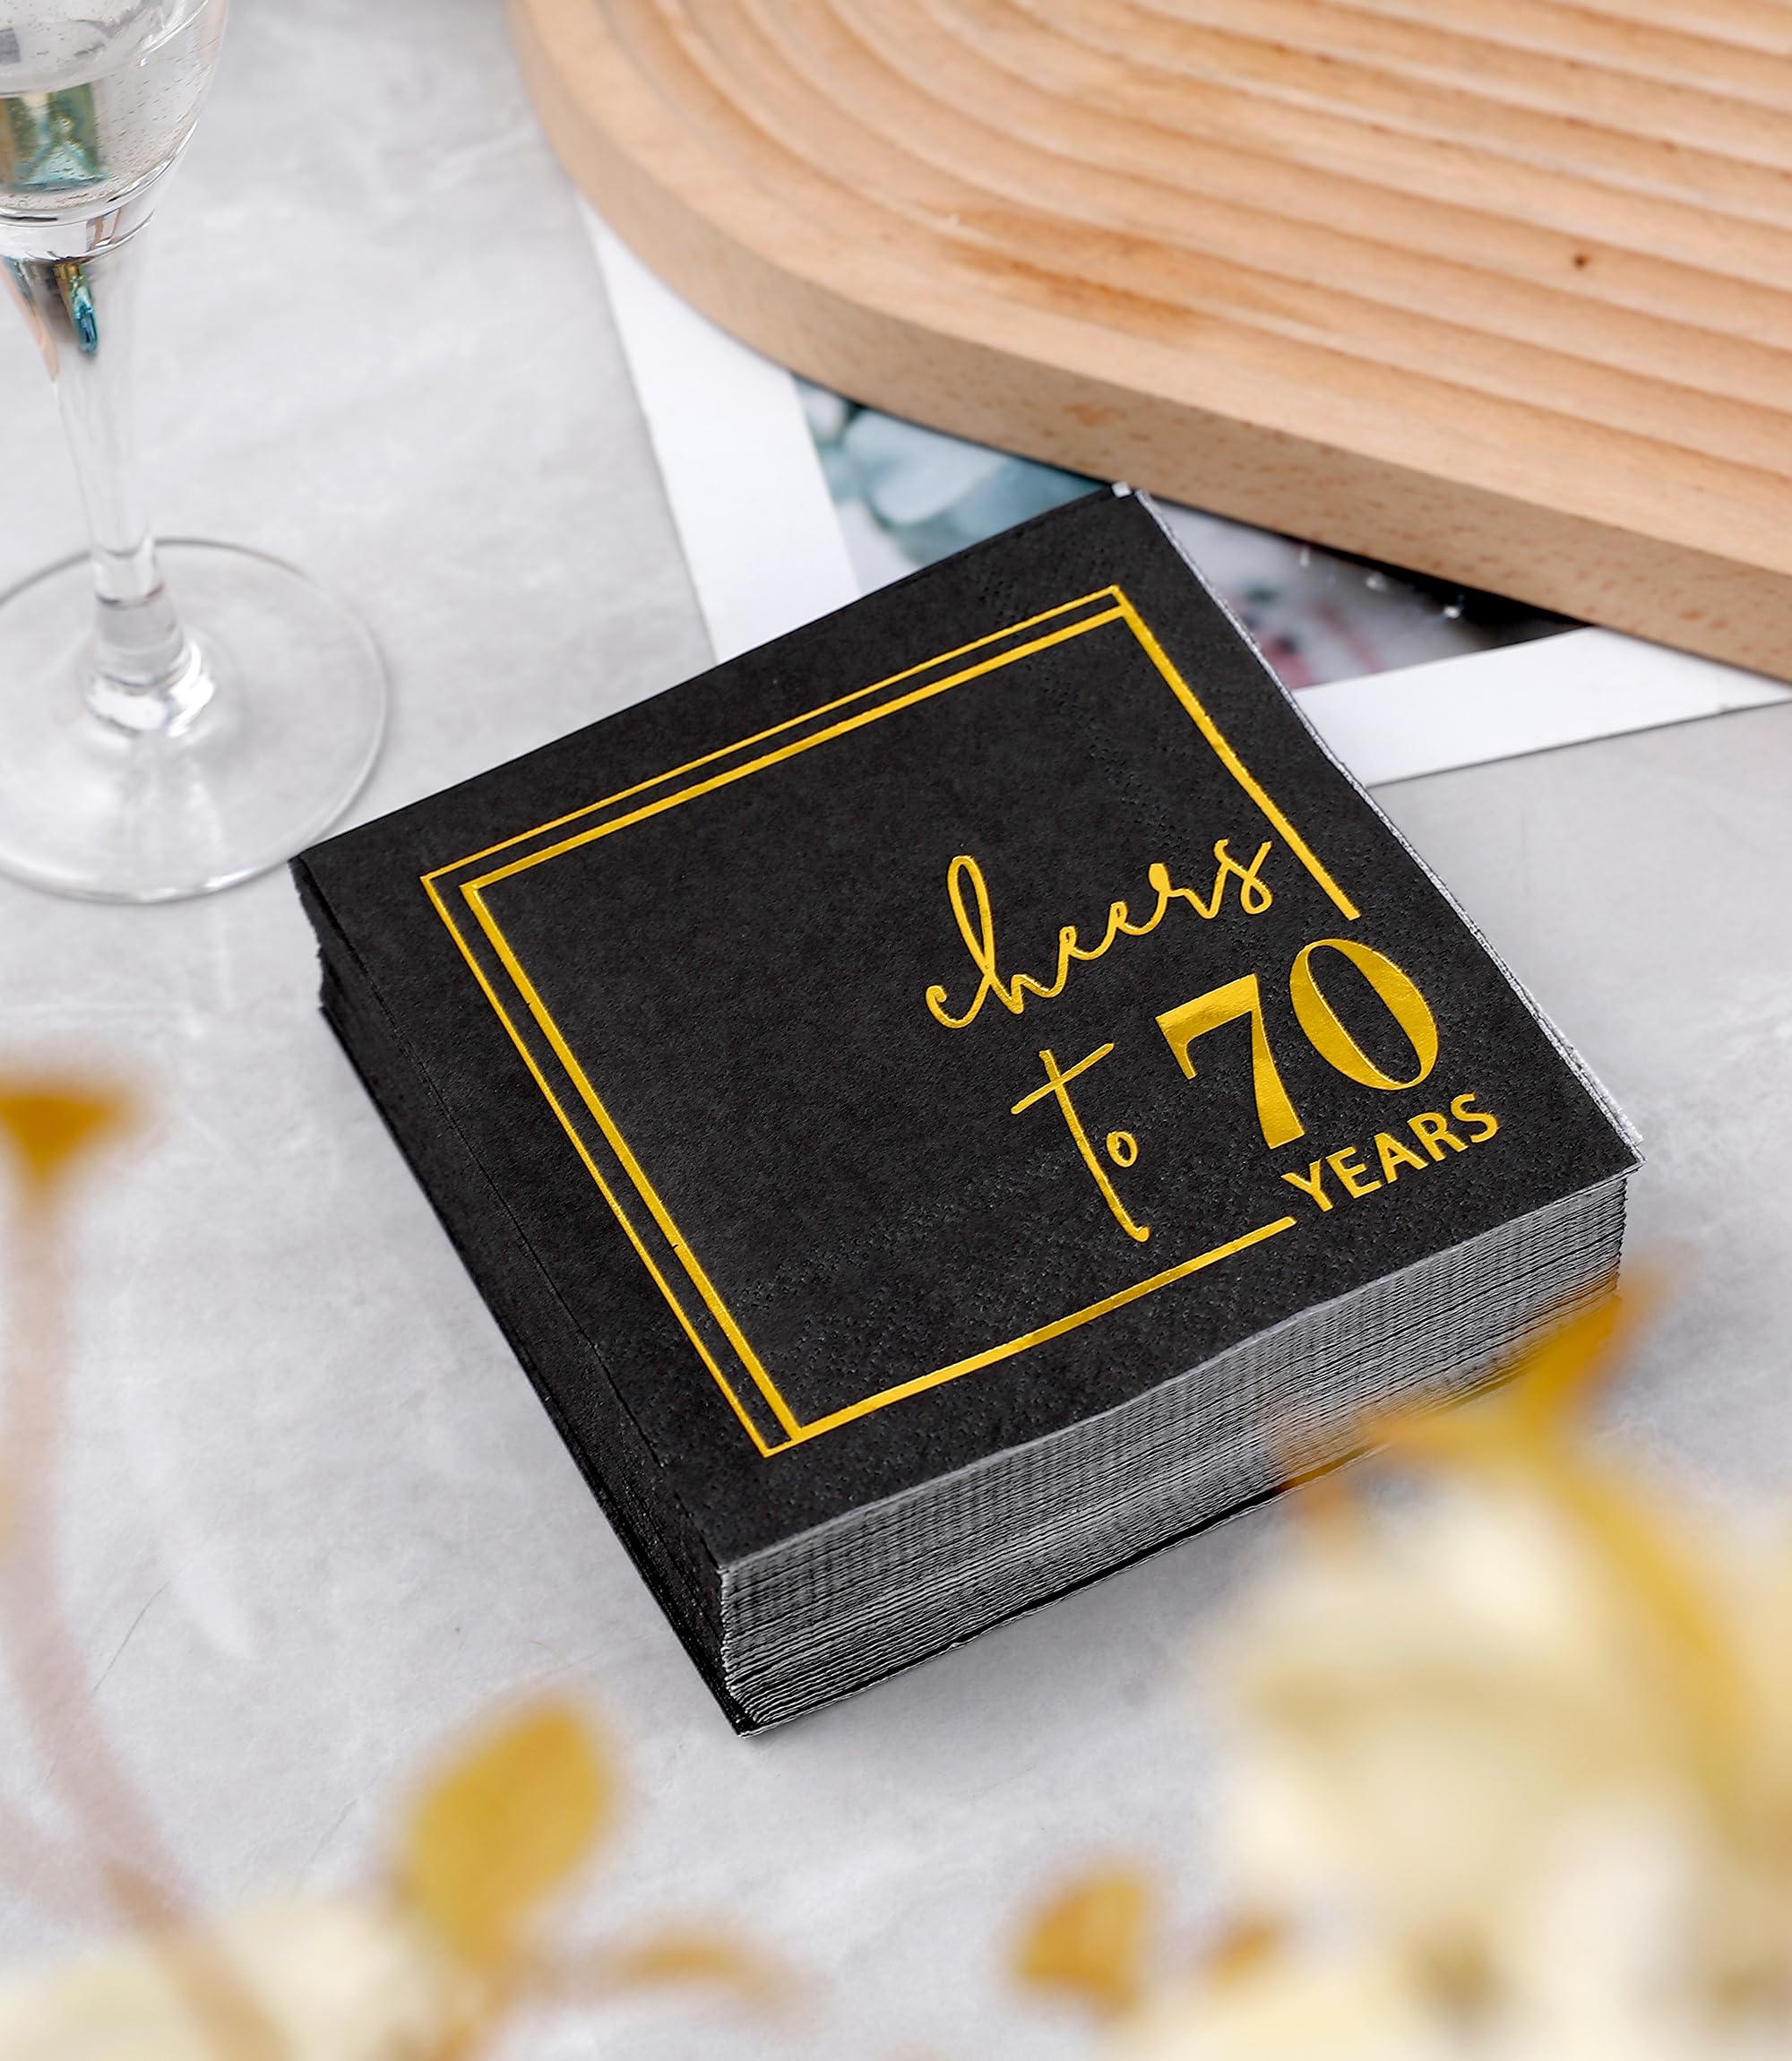 Cheers to 70 Years Cocktail Napkins - 50PK - 3-Ply 70th Birthday Napkins 5x5 Inches Disposable Party Napkins Paper Beverage Napkins for 70th Birthday Decorations Wedding Anniversary Black and Gold